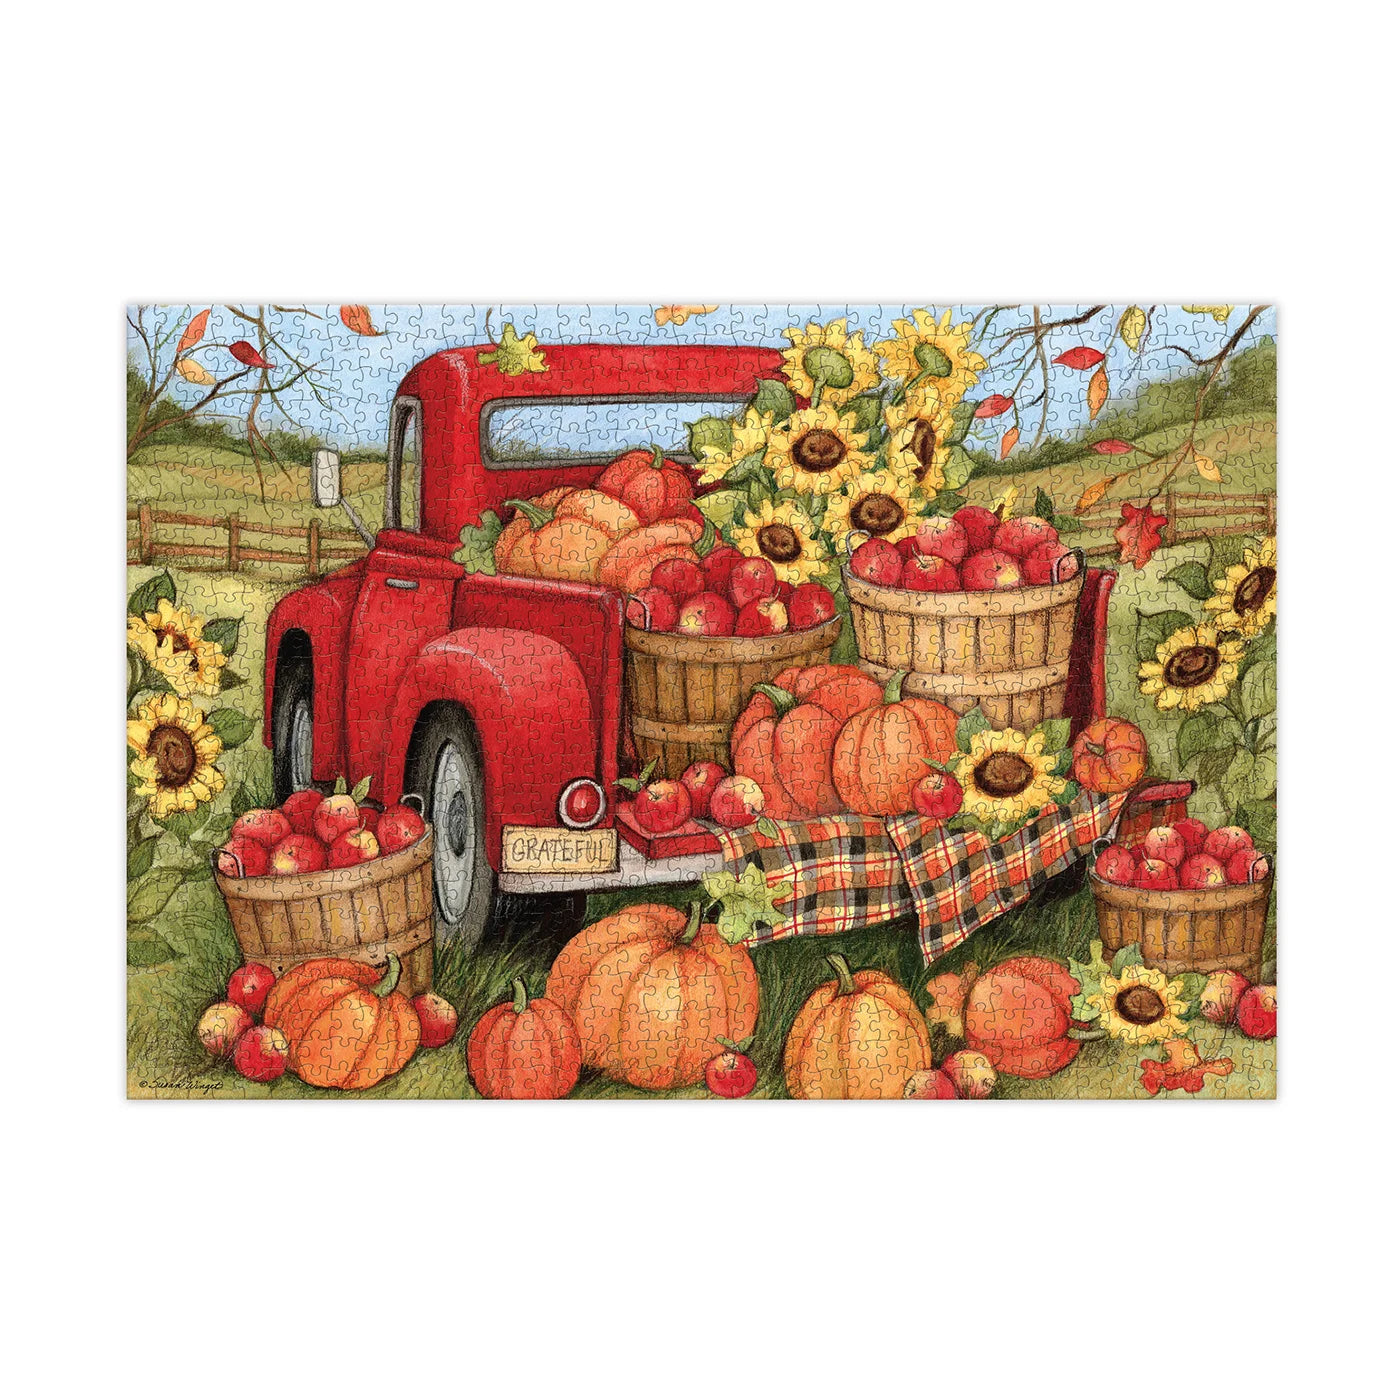 LANG Harvest Truck - 1000pc Jigsaw Puzzle